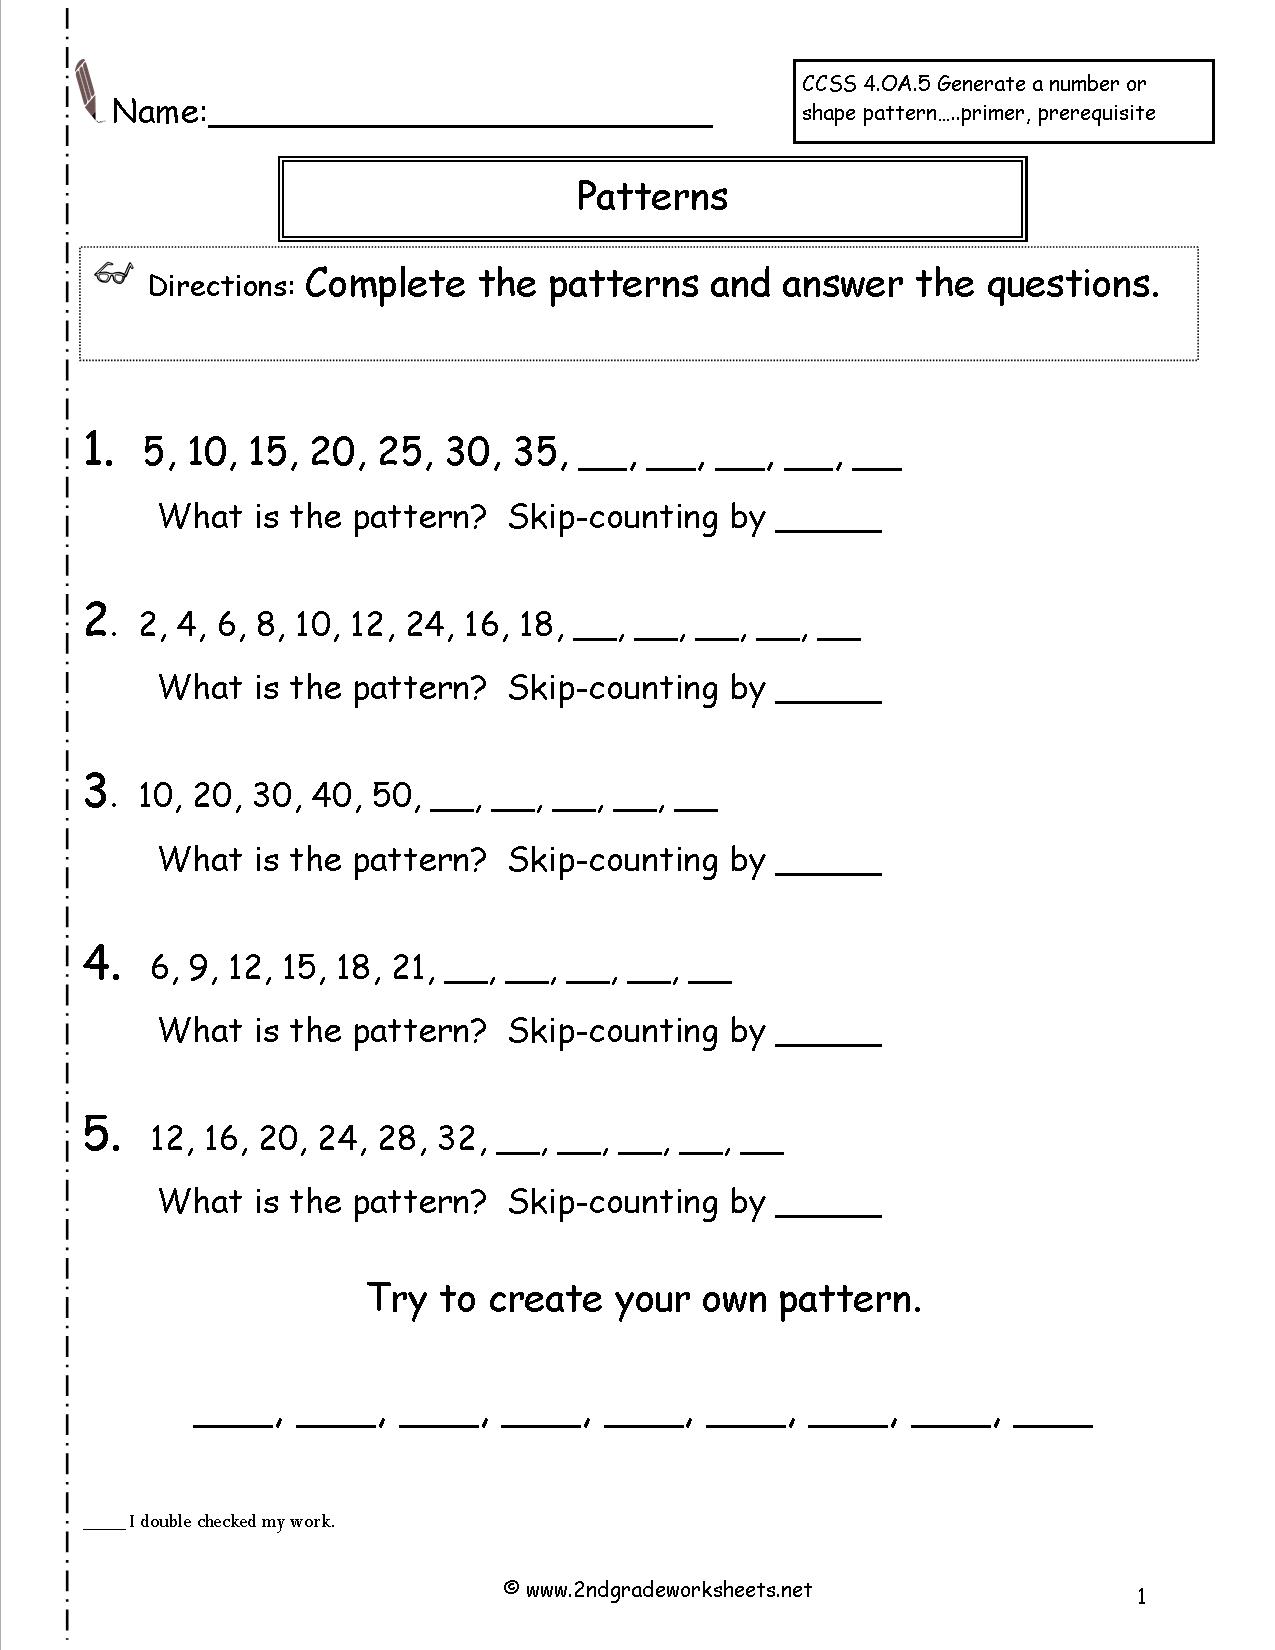 14-best-images-of-counting-by-5-worksheets-counting-by-5-worksheets